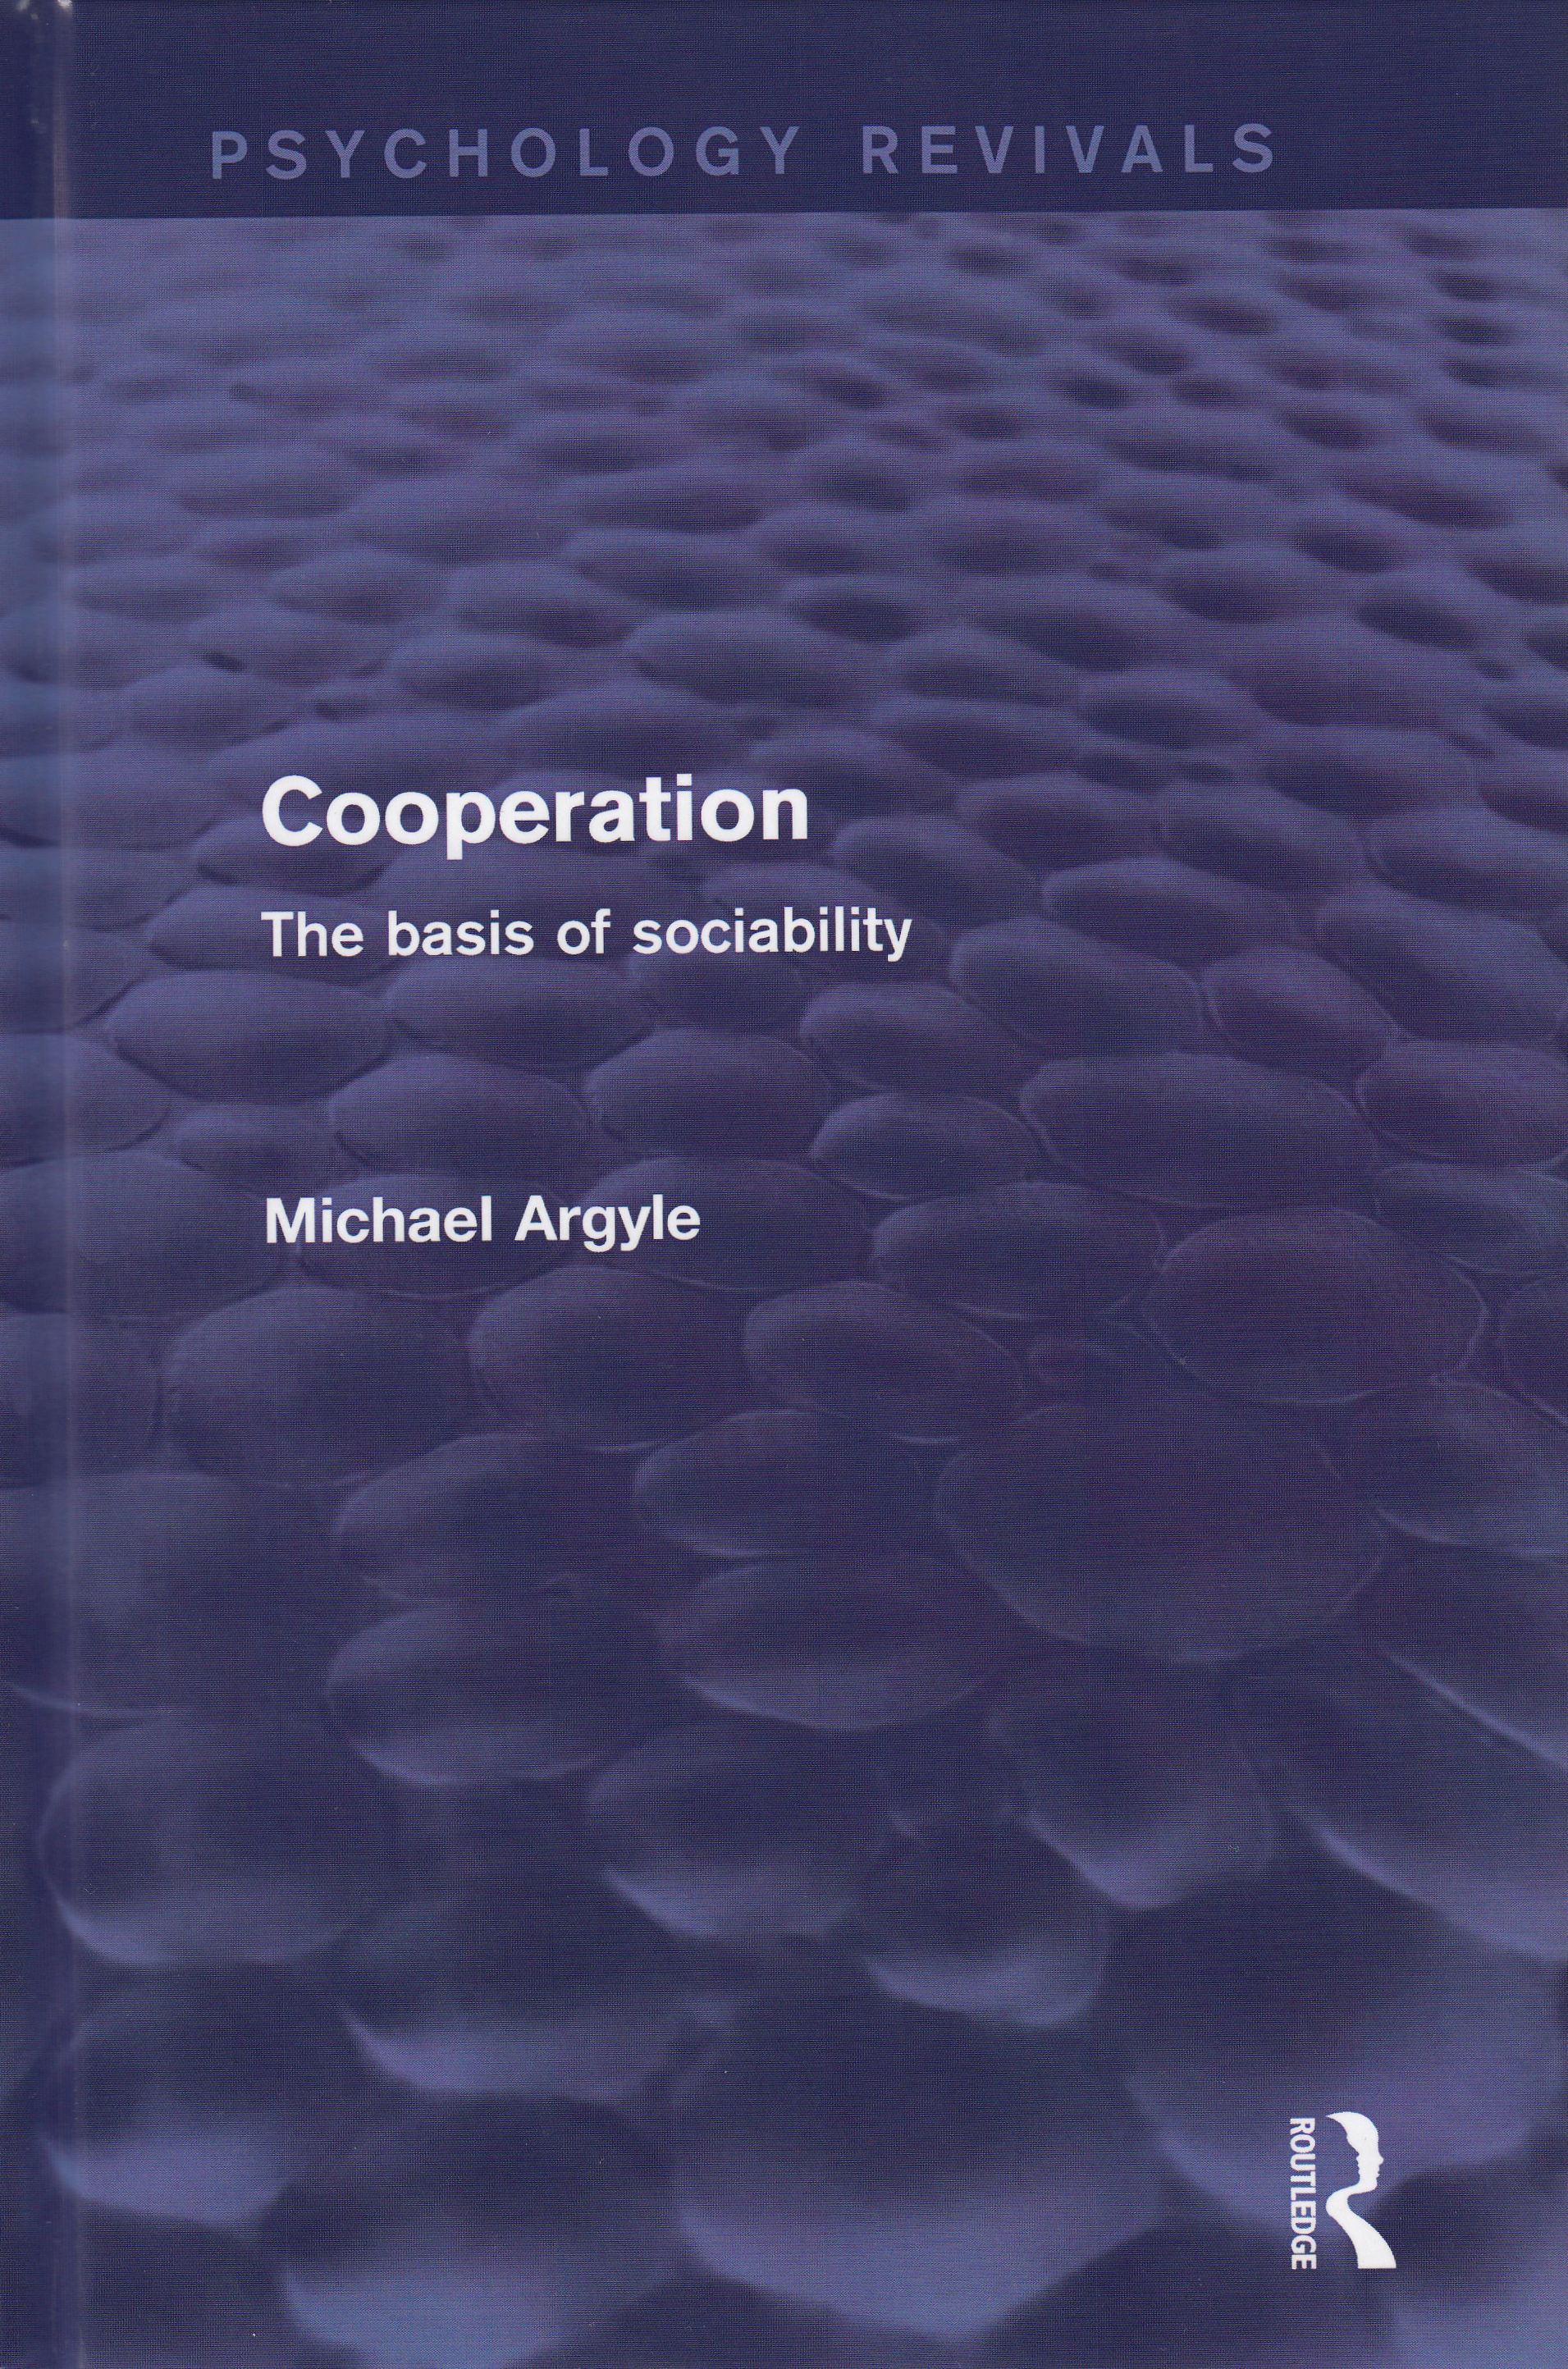 Cooperation, the basis of sociability